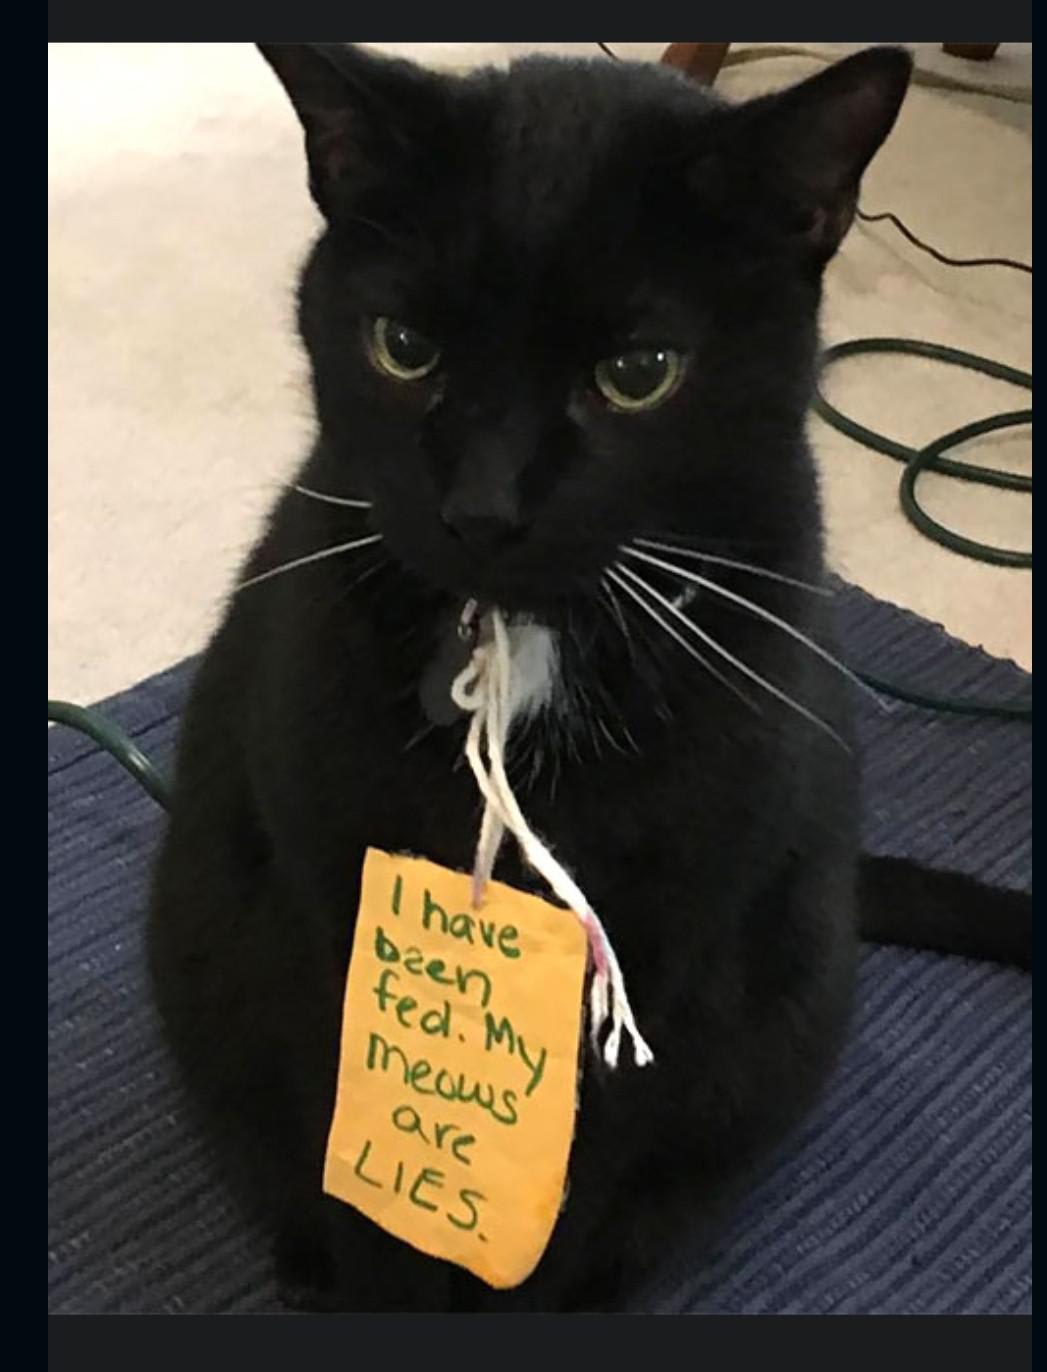 Left a note on the cat